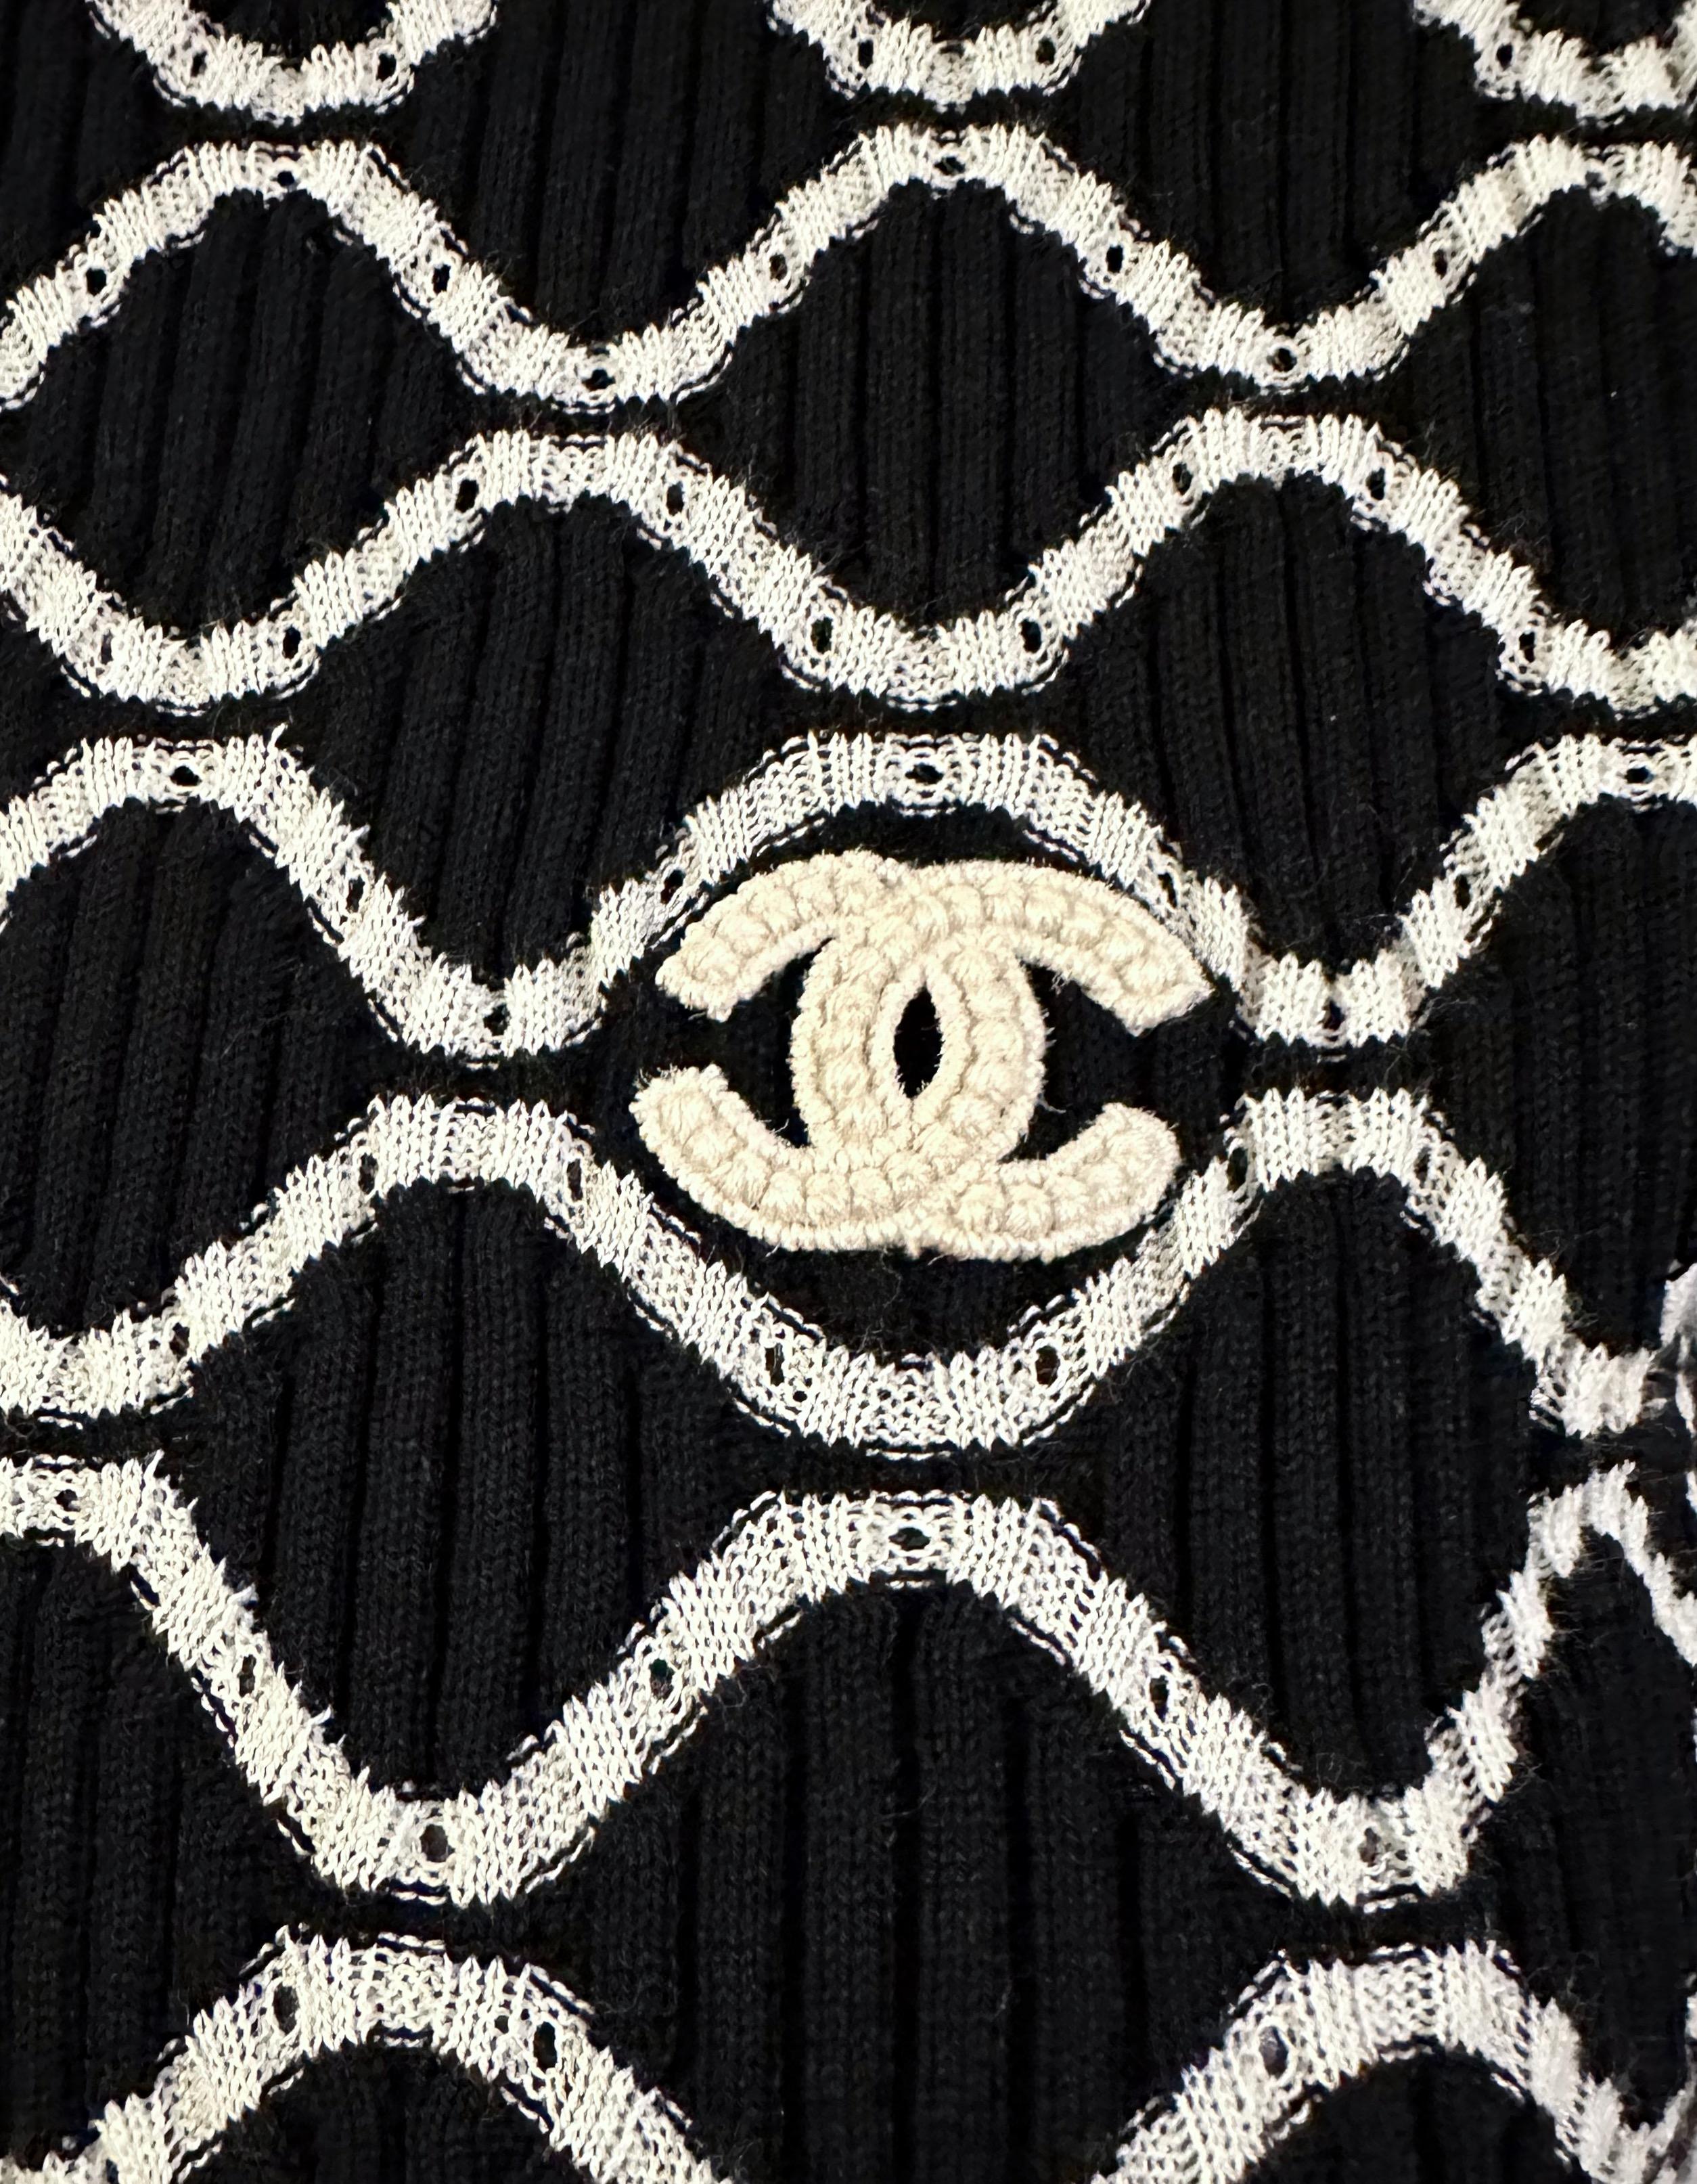 Women's Chanel Black and White Cotton Knit Top